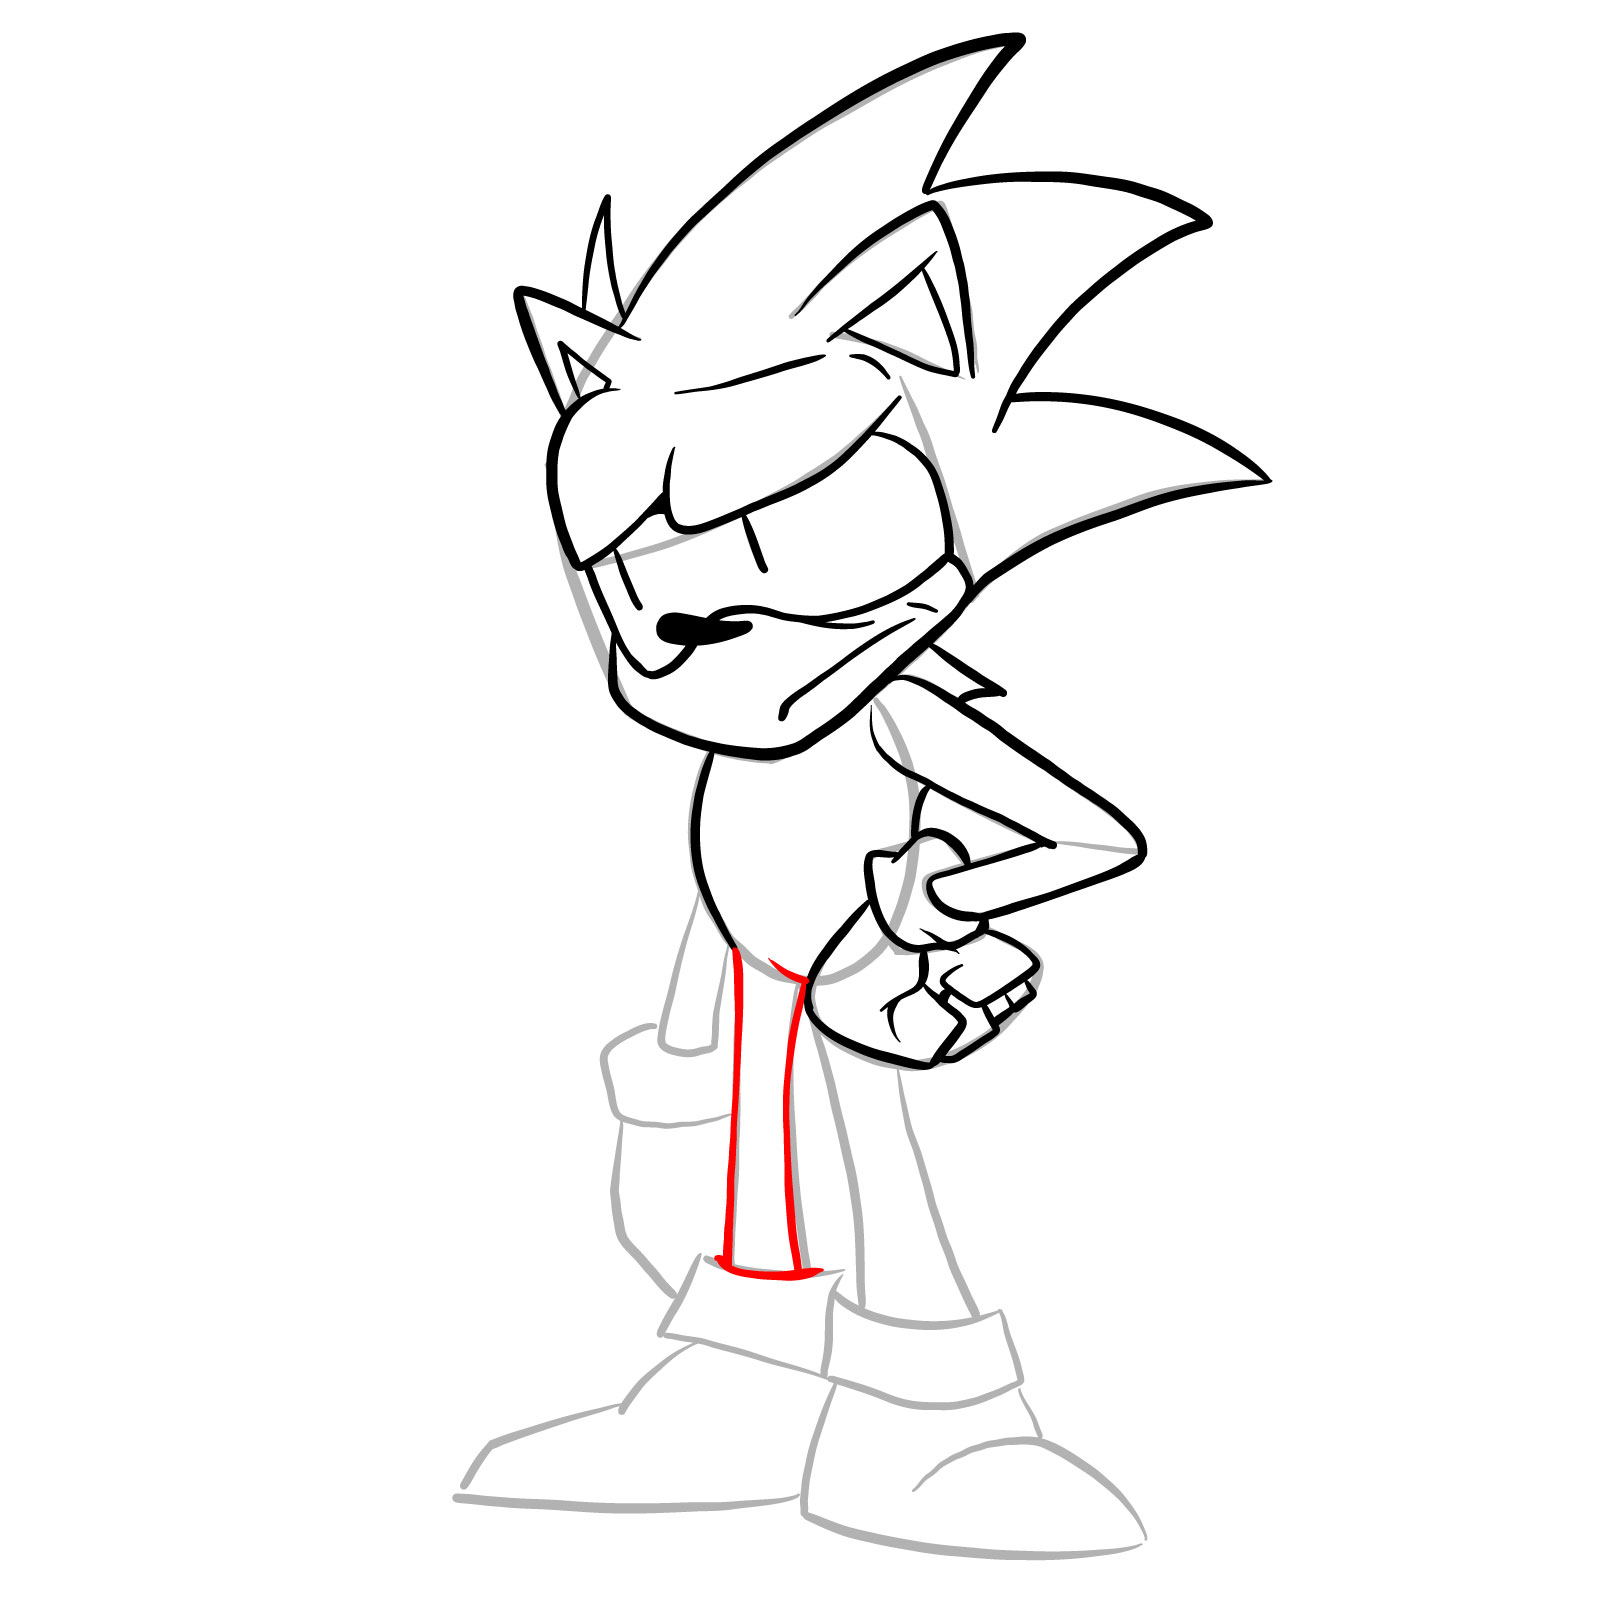 How to draw Sonic - FNF: Secret Histories - step 19